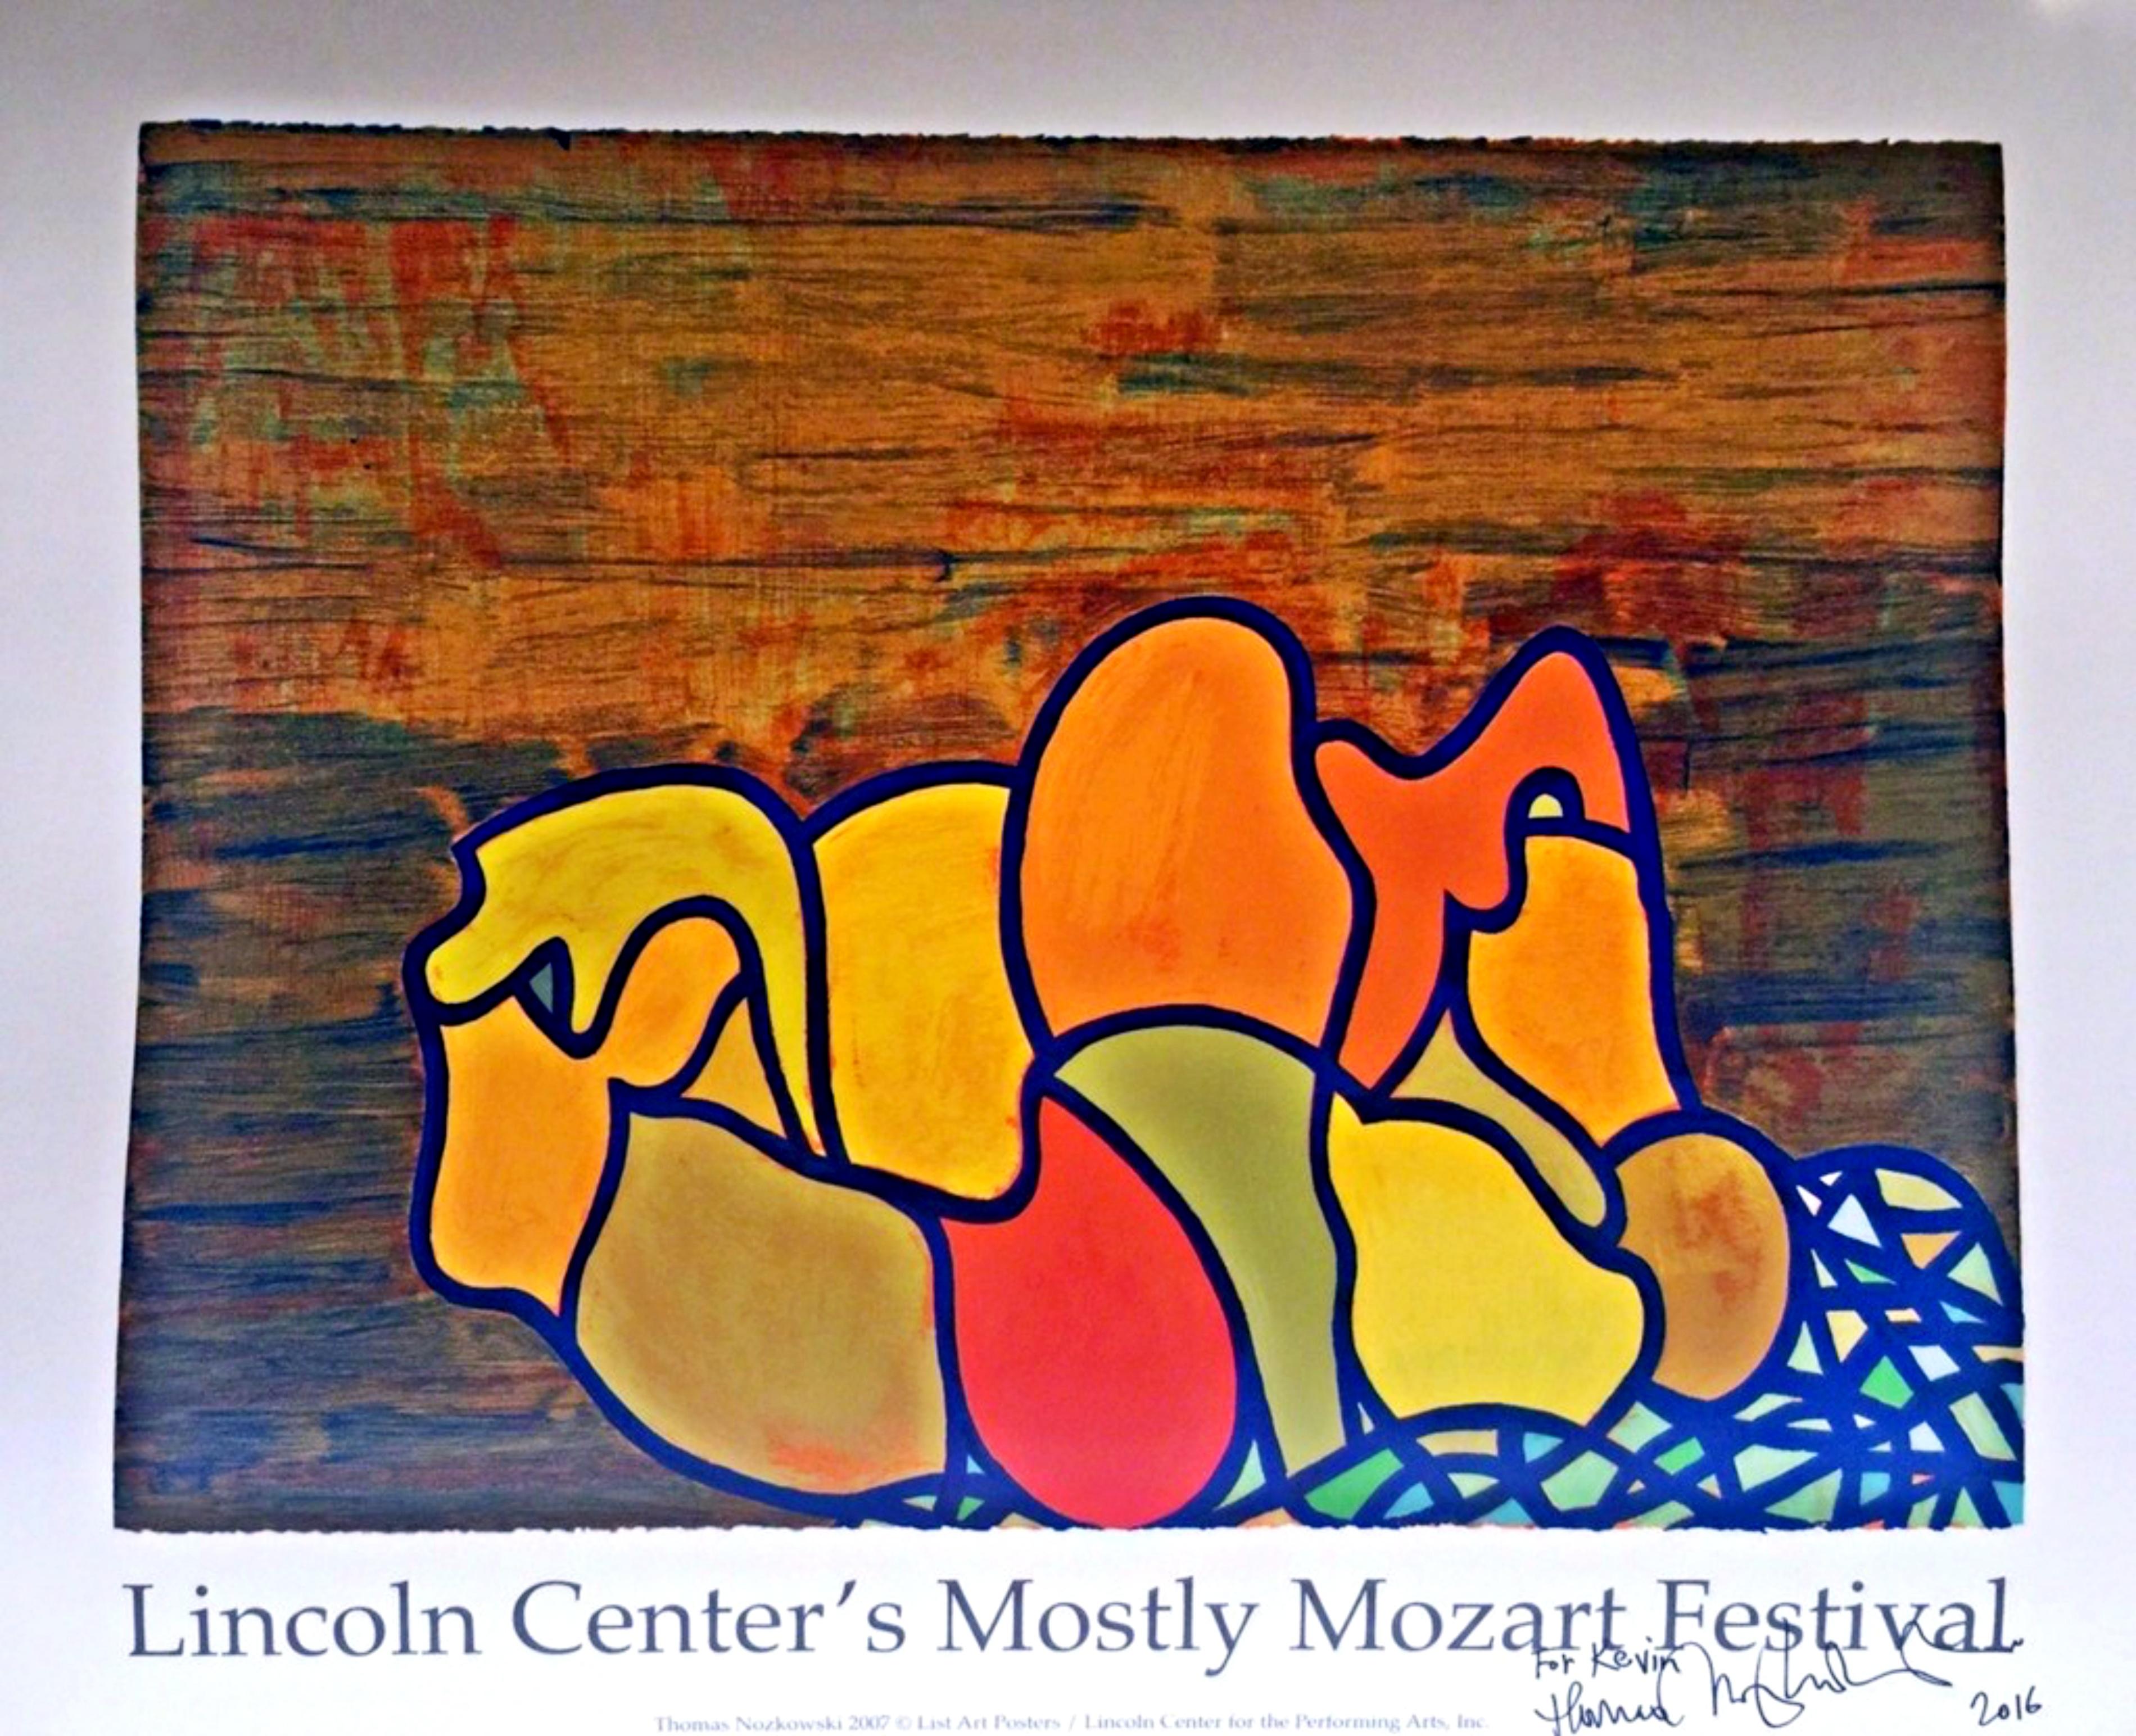 Abstraction for Lincoln Center, Hand signed dated, inscribed by Thomas Nozkowski